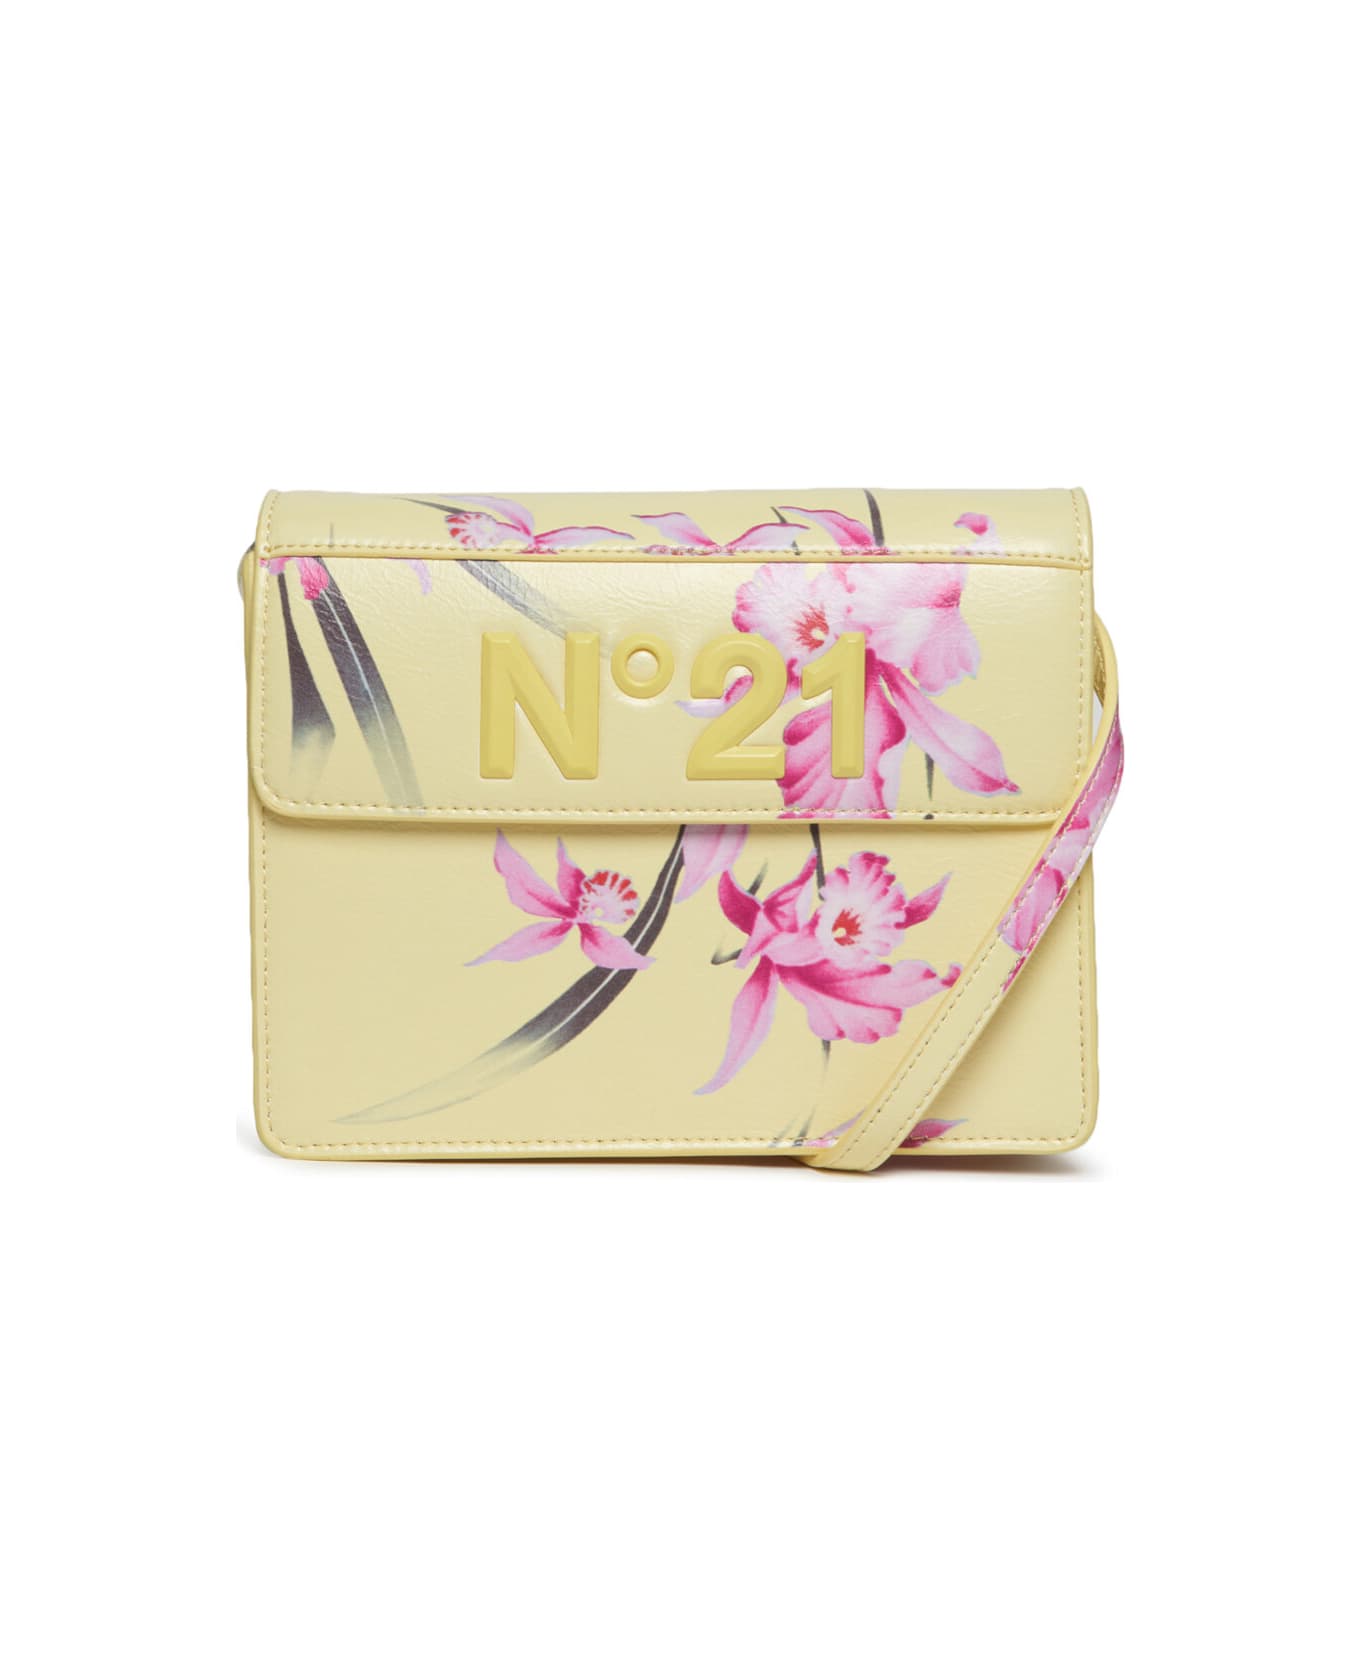 N.21 N21w26f Bags N°21 Yellow Flap Bag In Leatherette With Shoulder Strap And Floral Print - Banana light yellow